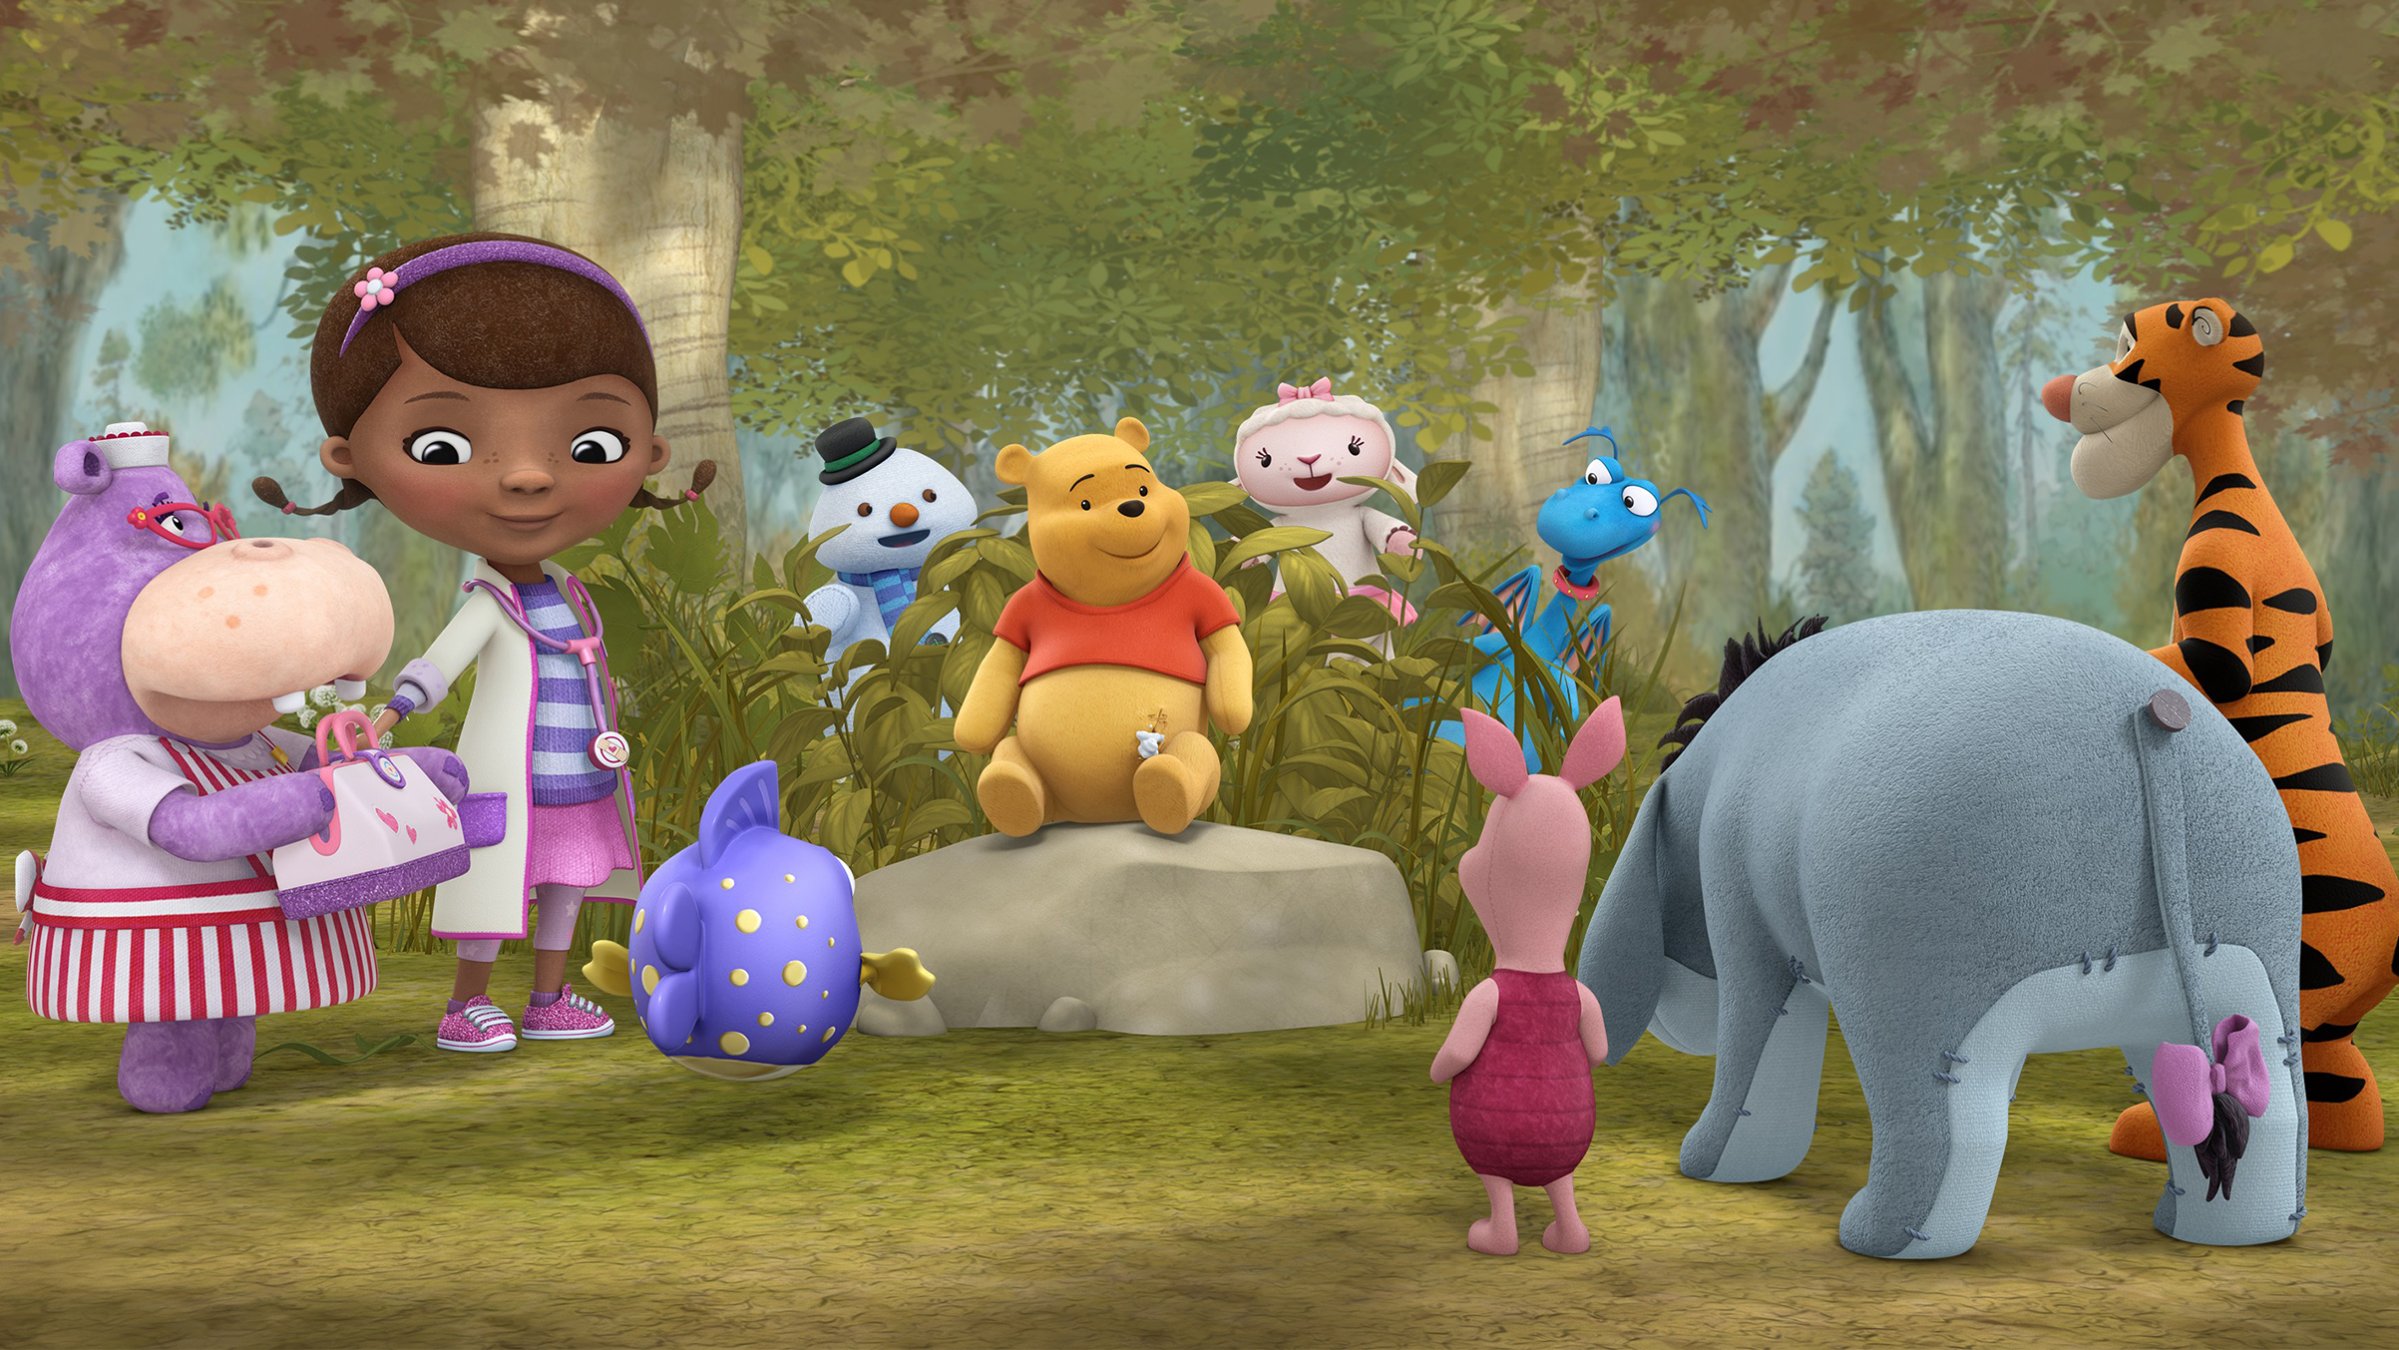 Doc ventures "Into the Hundred Acre Wood!" with her toys and welcomes Winnie the Pooh and friends to McStuffinsville in Disney Junior's "Doc McStuffins" on January 18, 2017.